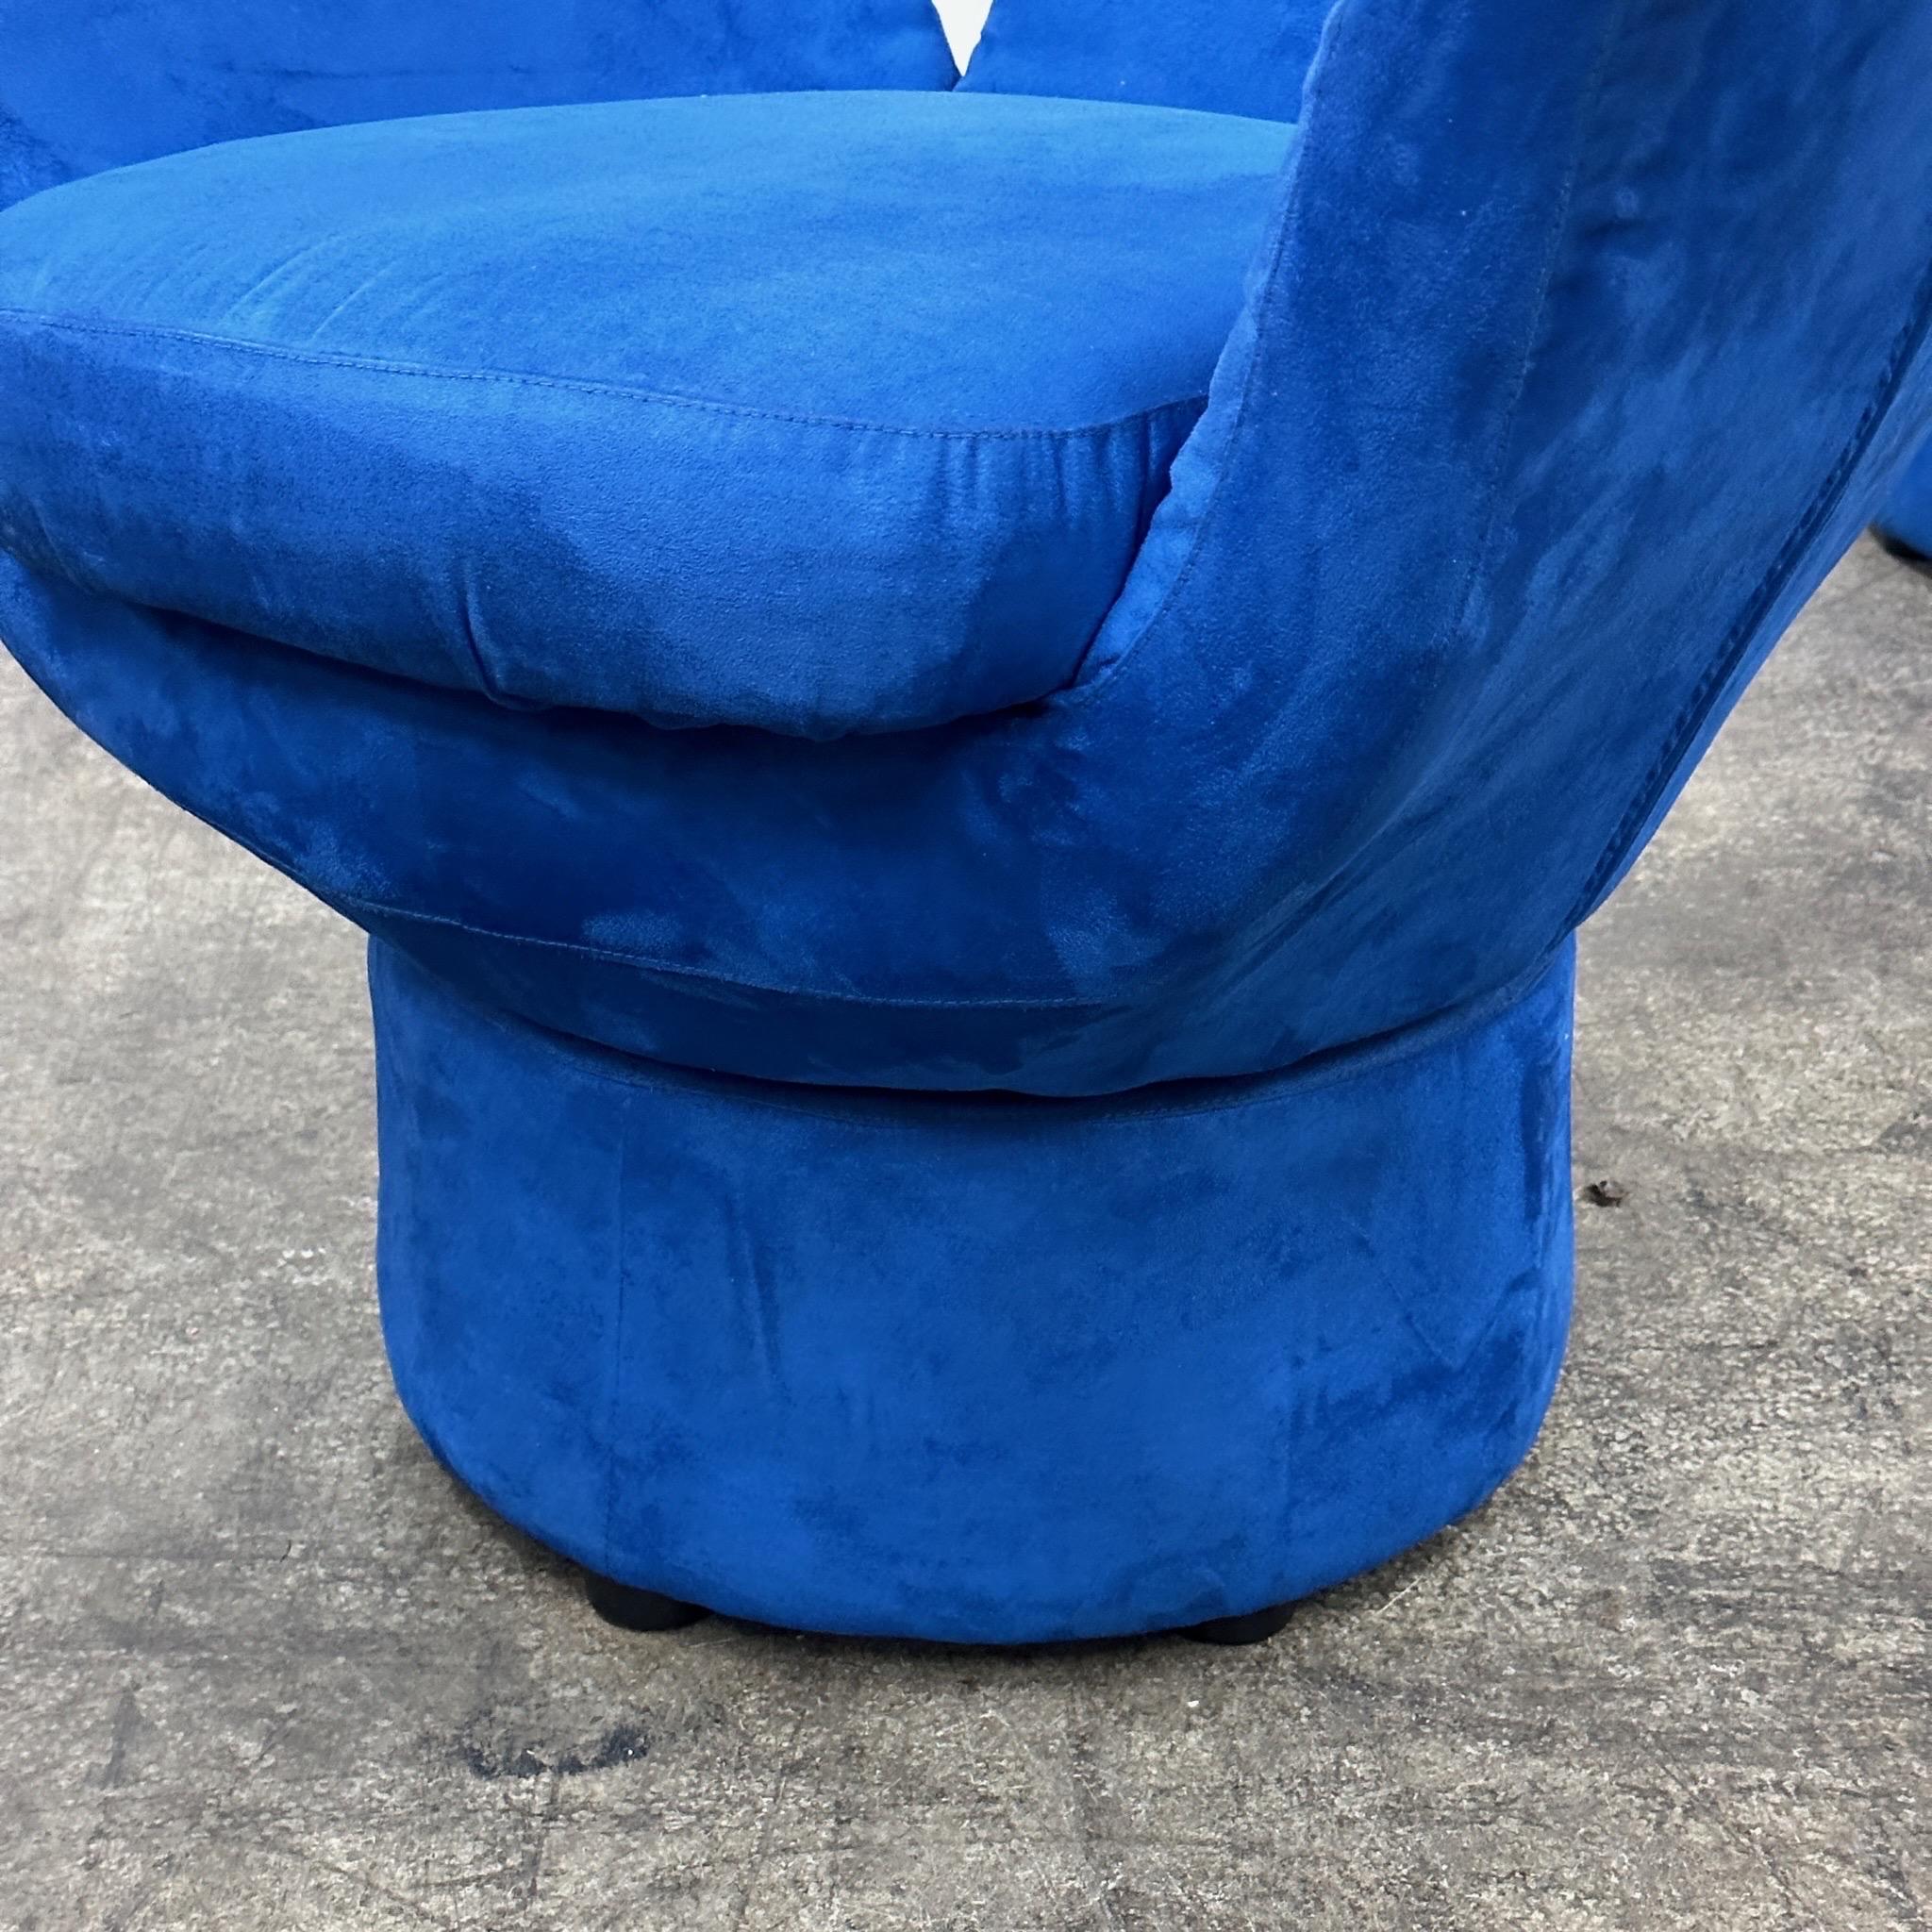 c. 1980s. Price is for the set. Contact us if you’d like to purchase a single item. Upholstered in blue microsuede.